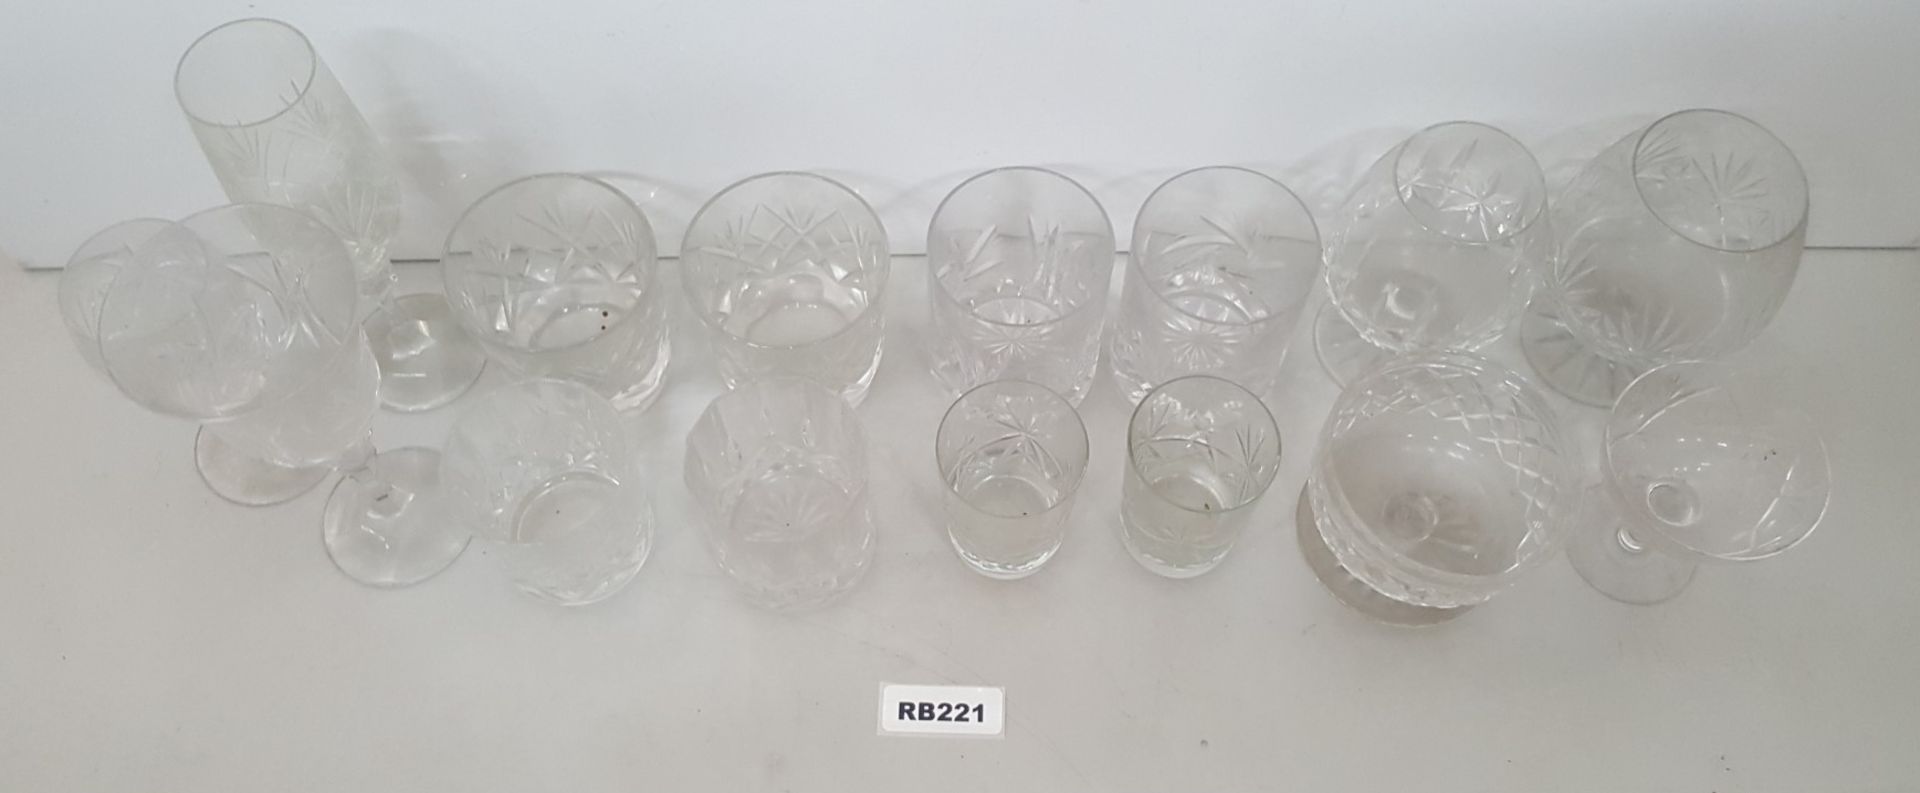 15 x Vintage Cut Glass Drinking Glasses - Ref RB221 I - Image 3 of 5